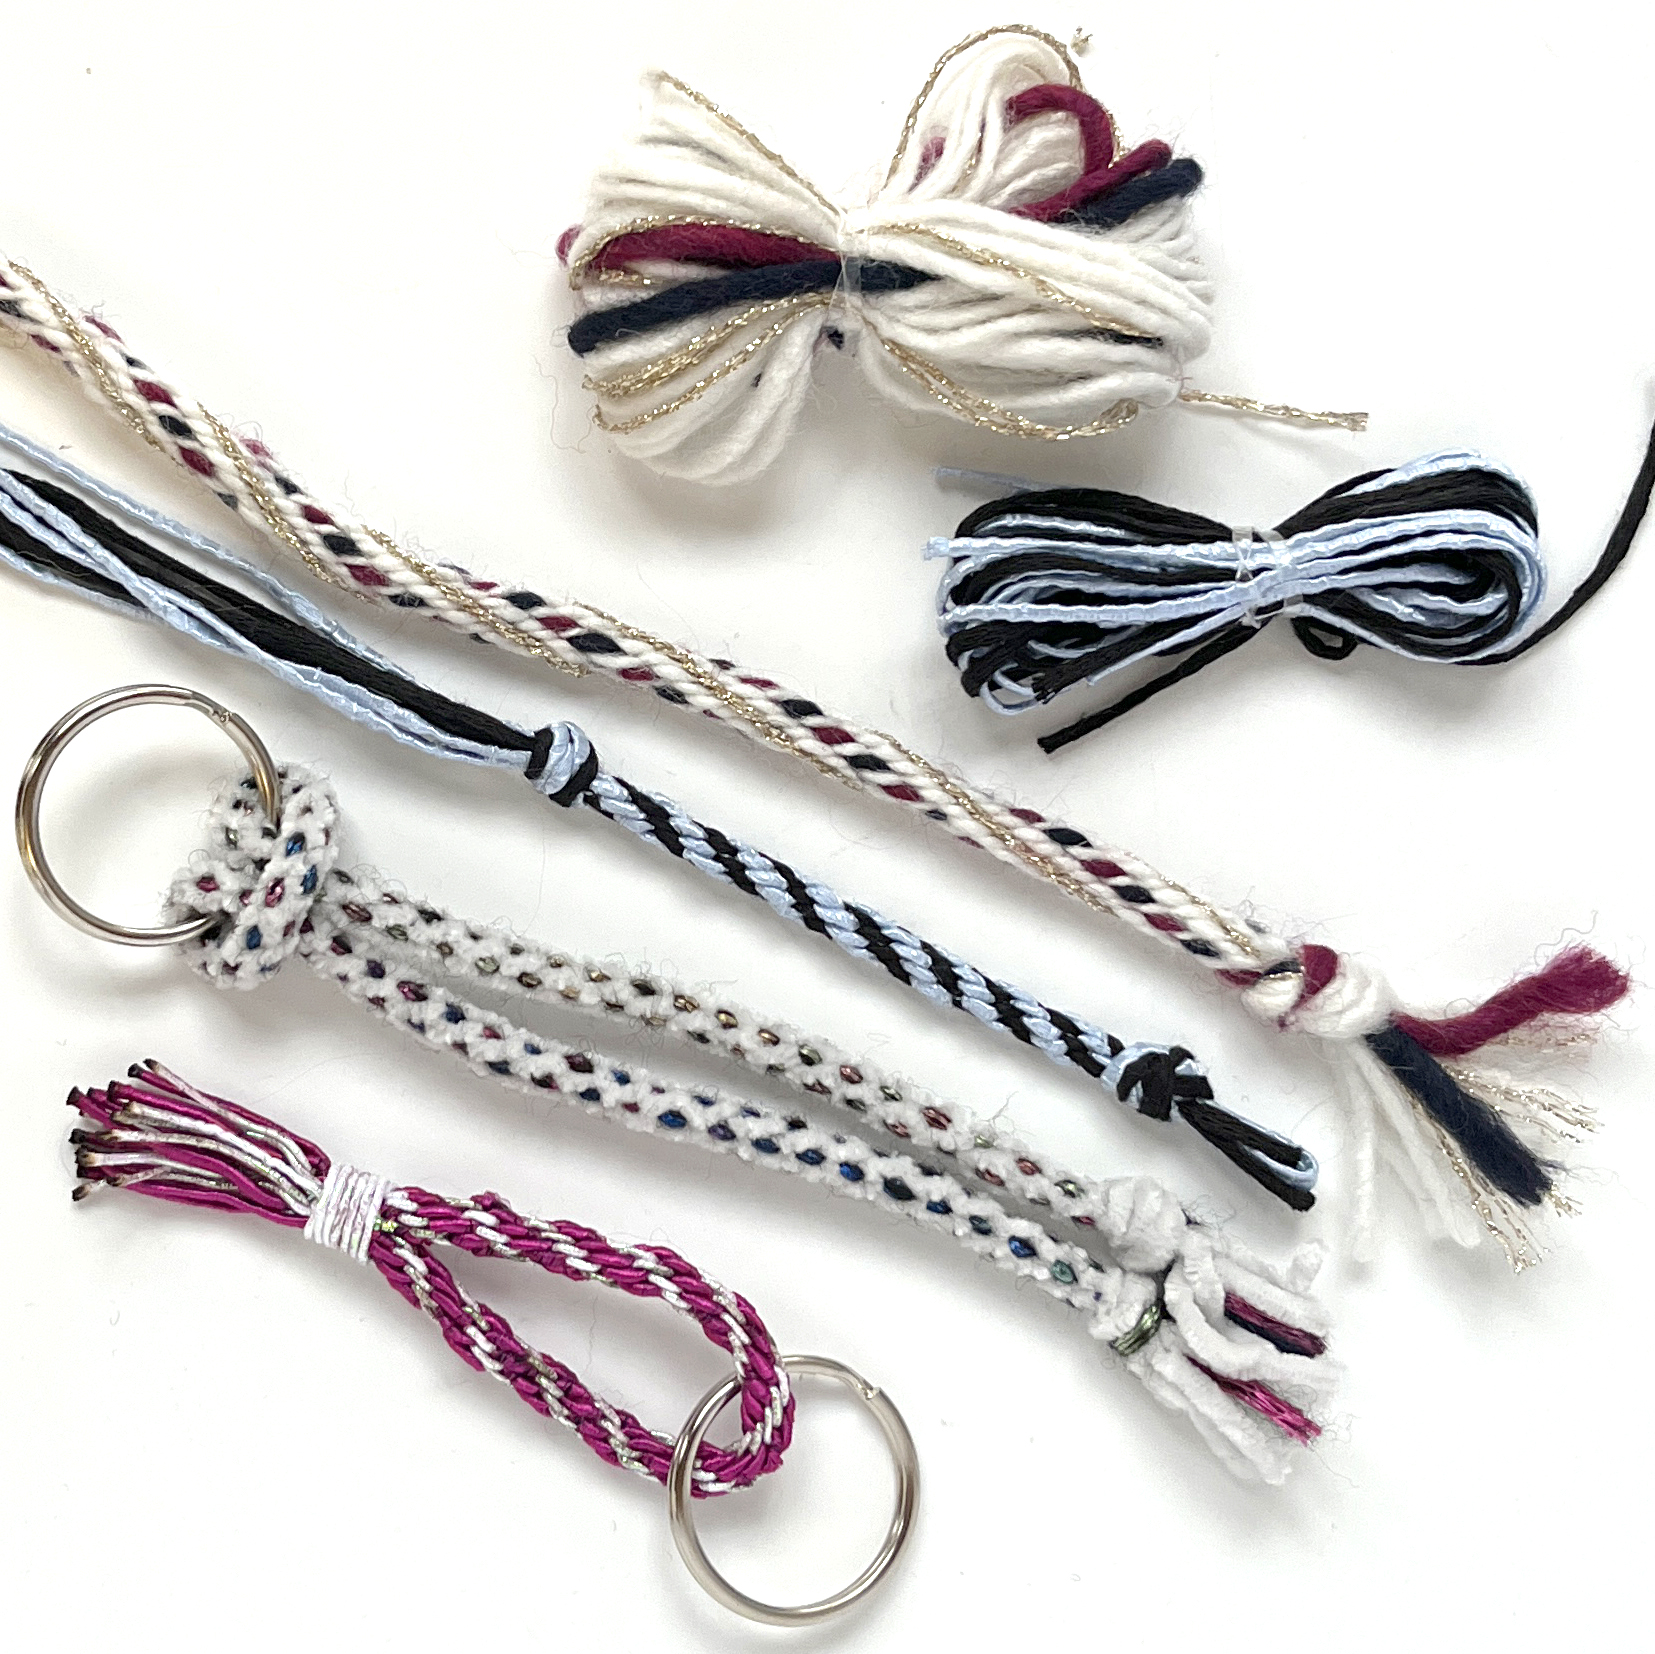 a collection of braided cords on a white background